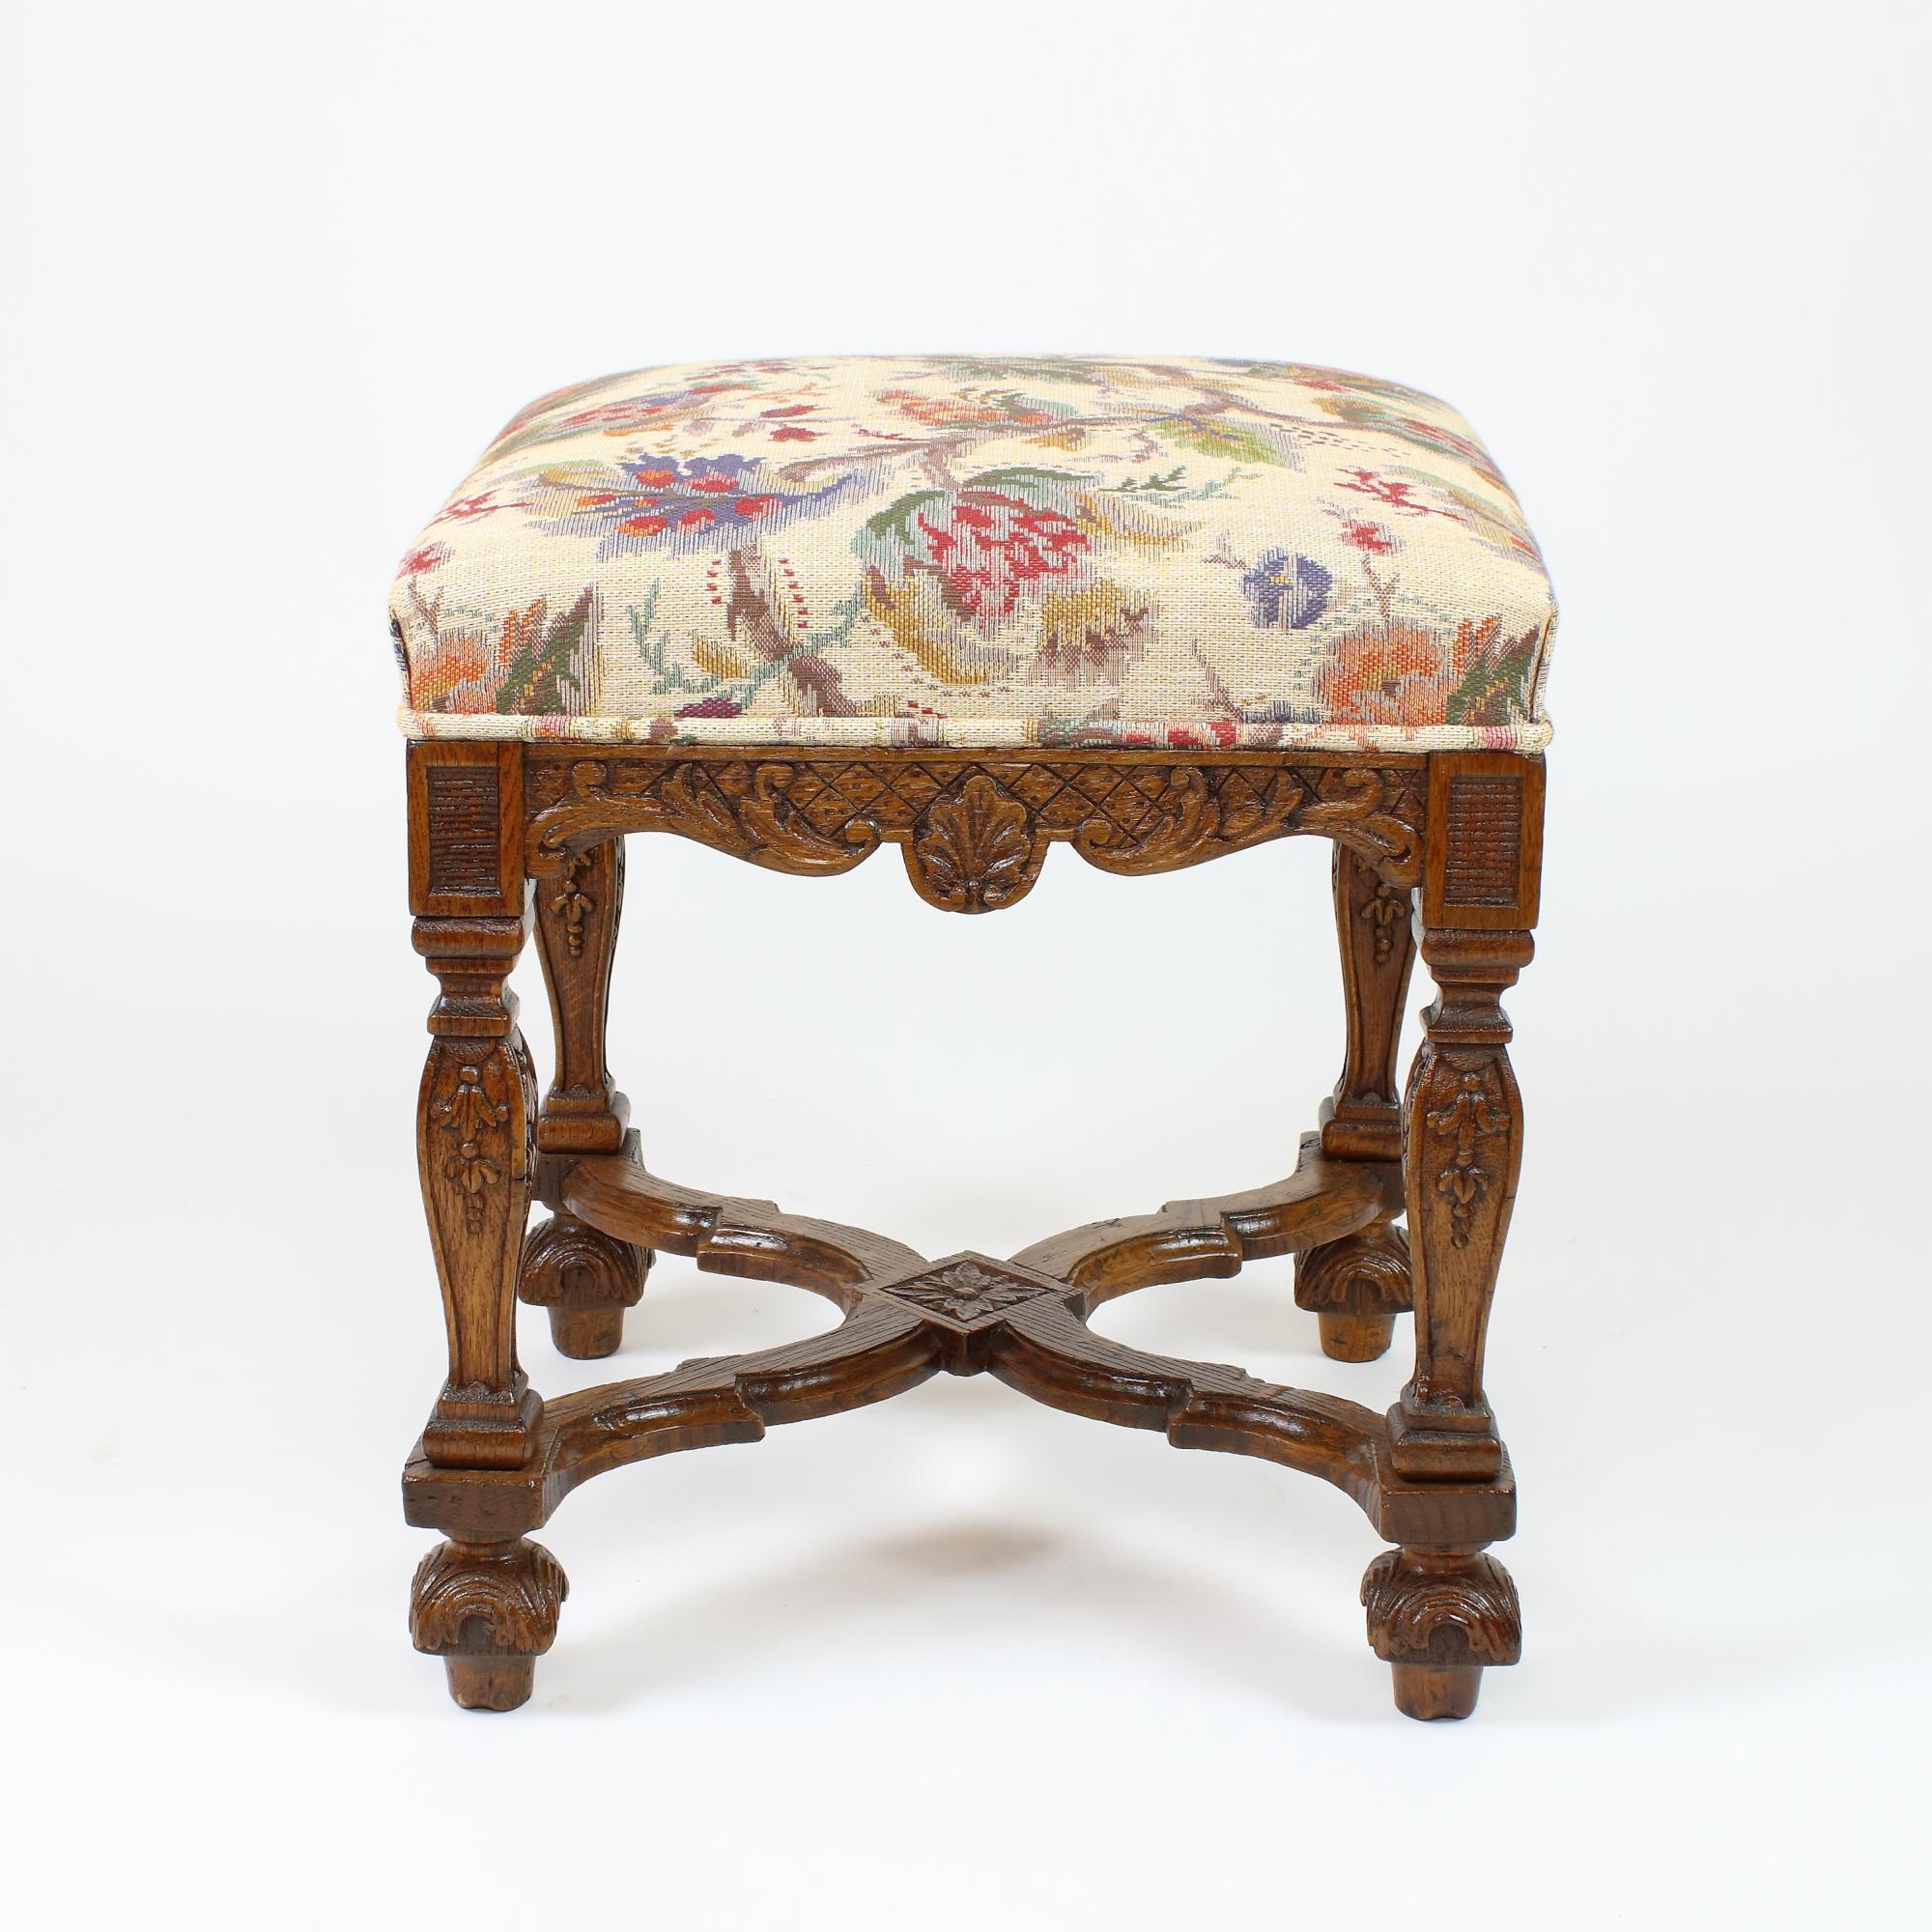 Early 18th Century Louis XIV/Régence Carved Oak stool or Tabouret

Square and upholstered seat resting on a shaped apron with c-scrolls, leafs and central shell motifs. The four legs are carved as square balusters decorated with flower garland